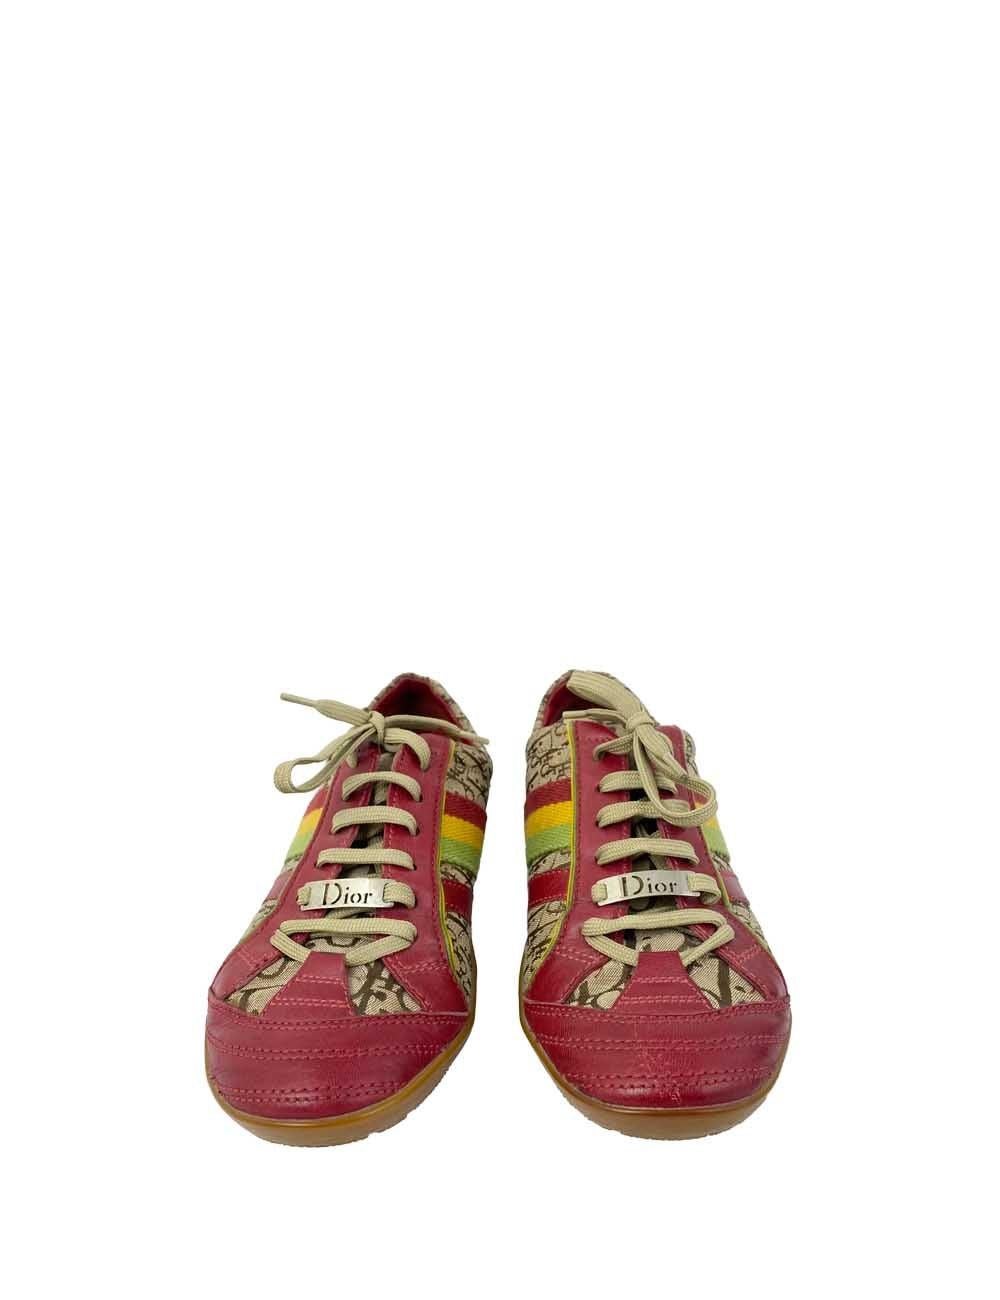 Monogram print and red leather Dior sneakers. Red, yellow, and green stripes on the side with Dior-embossed plate on the front of the laces. Great condition barring some slight scuffing.

Additional information:
Material: Leather, Textile
Size: EU